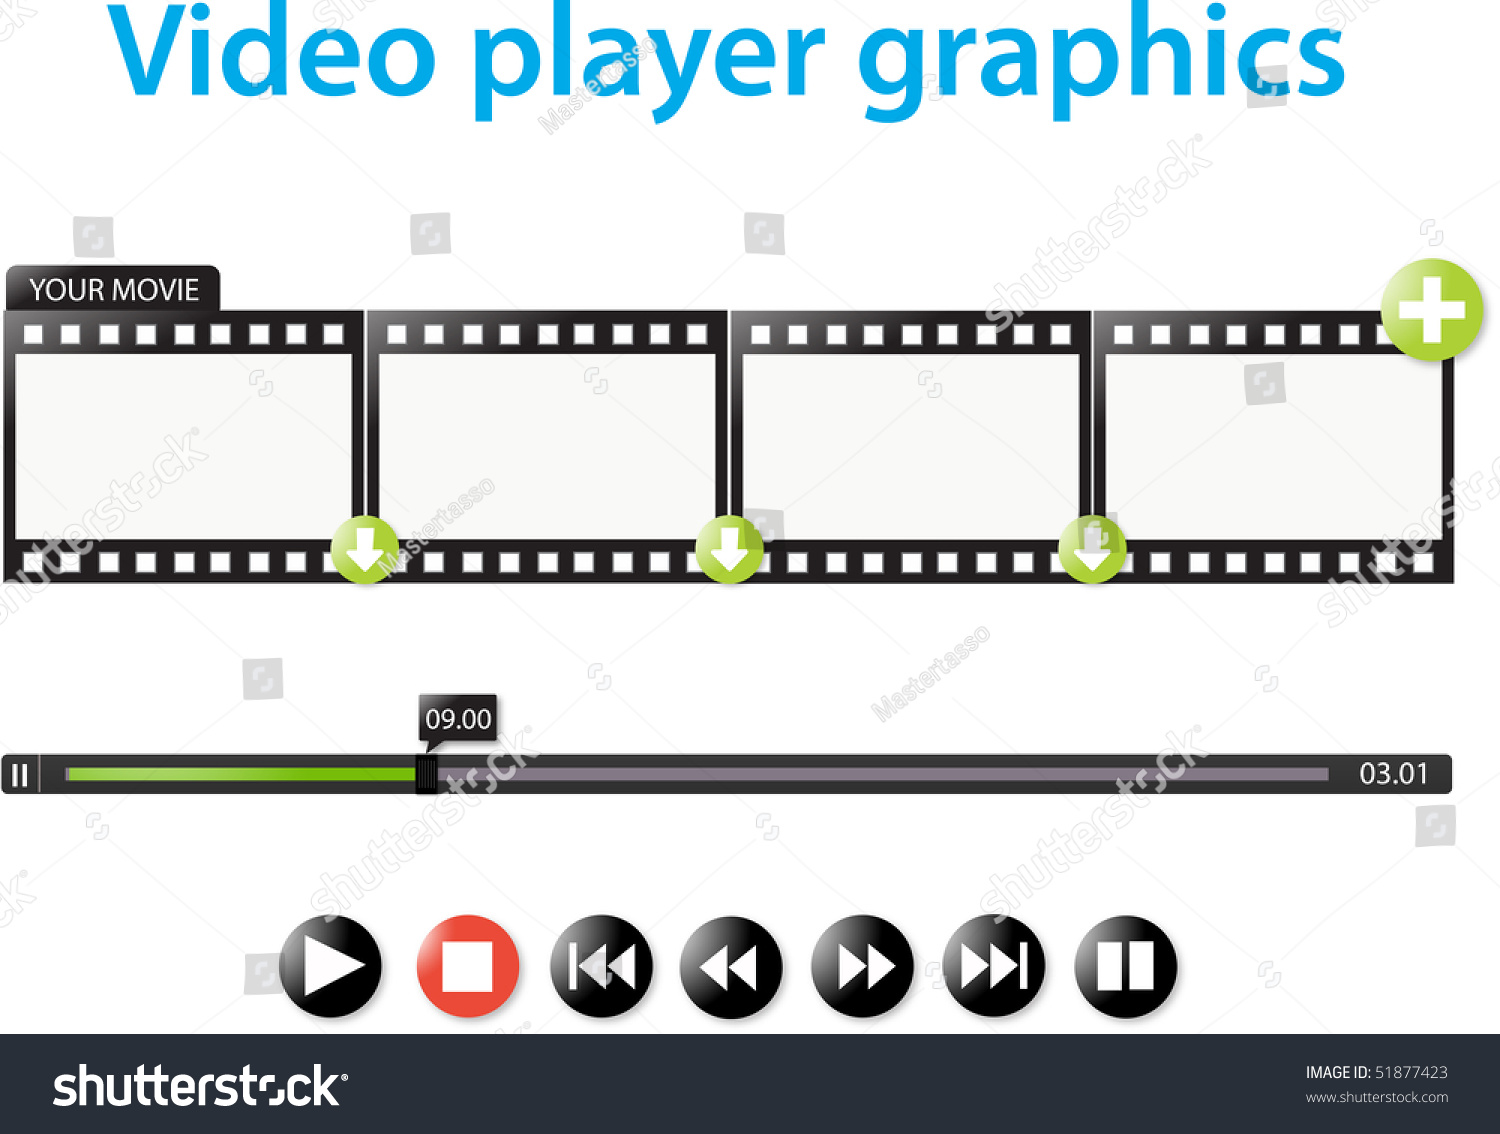 video player clipart - photo #37